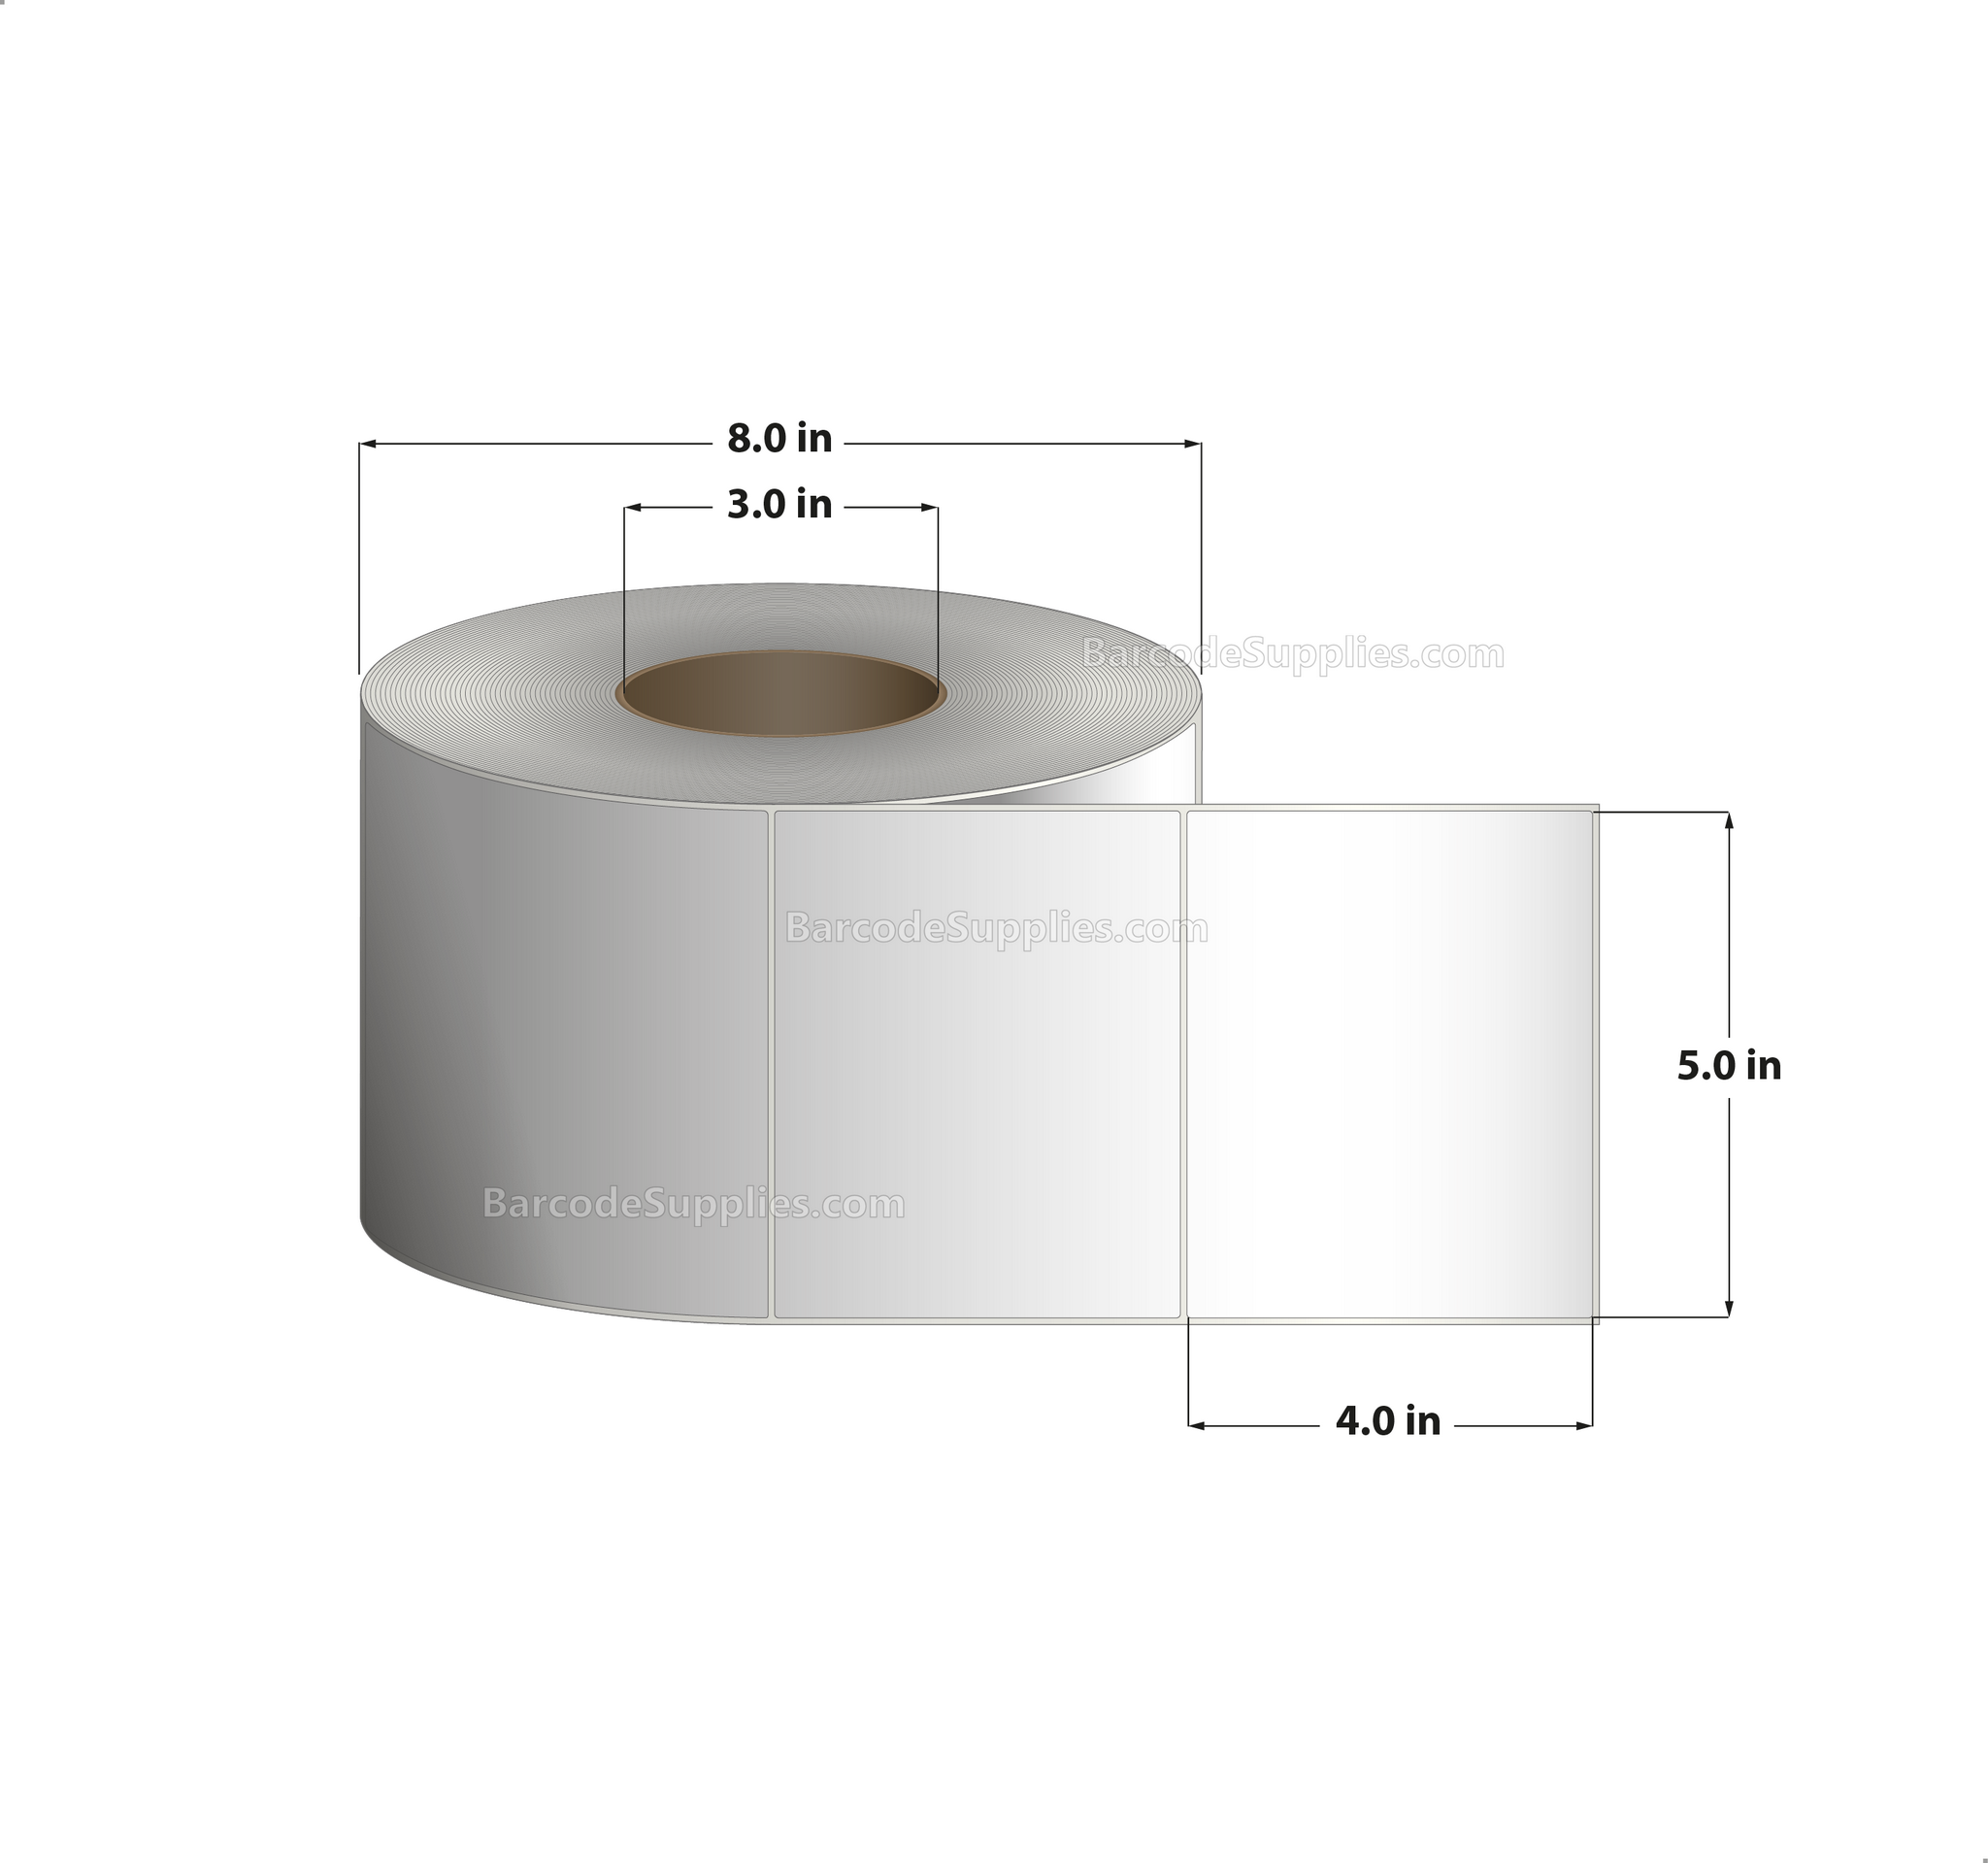 5 x 4 Thermal Transfer White Labels With Permanent Acrylic Adhesive - Not Perforated - 1500 Labels Per Roll - Carton Of 4 Rolls - 6000 Labels Total - MPN: TH54-1